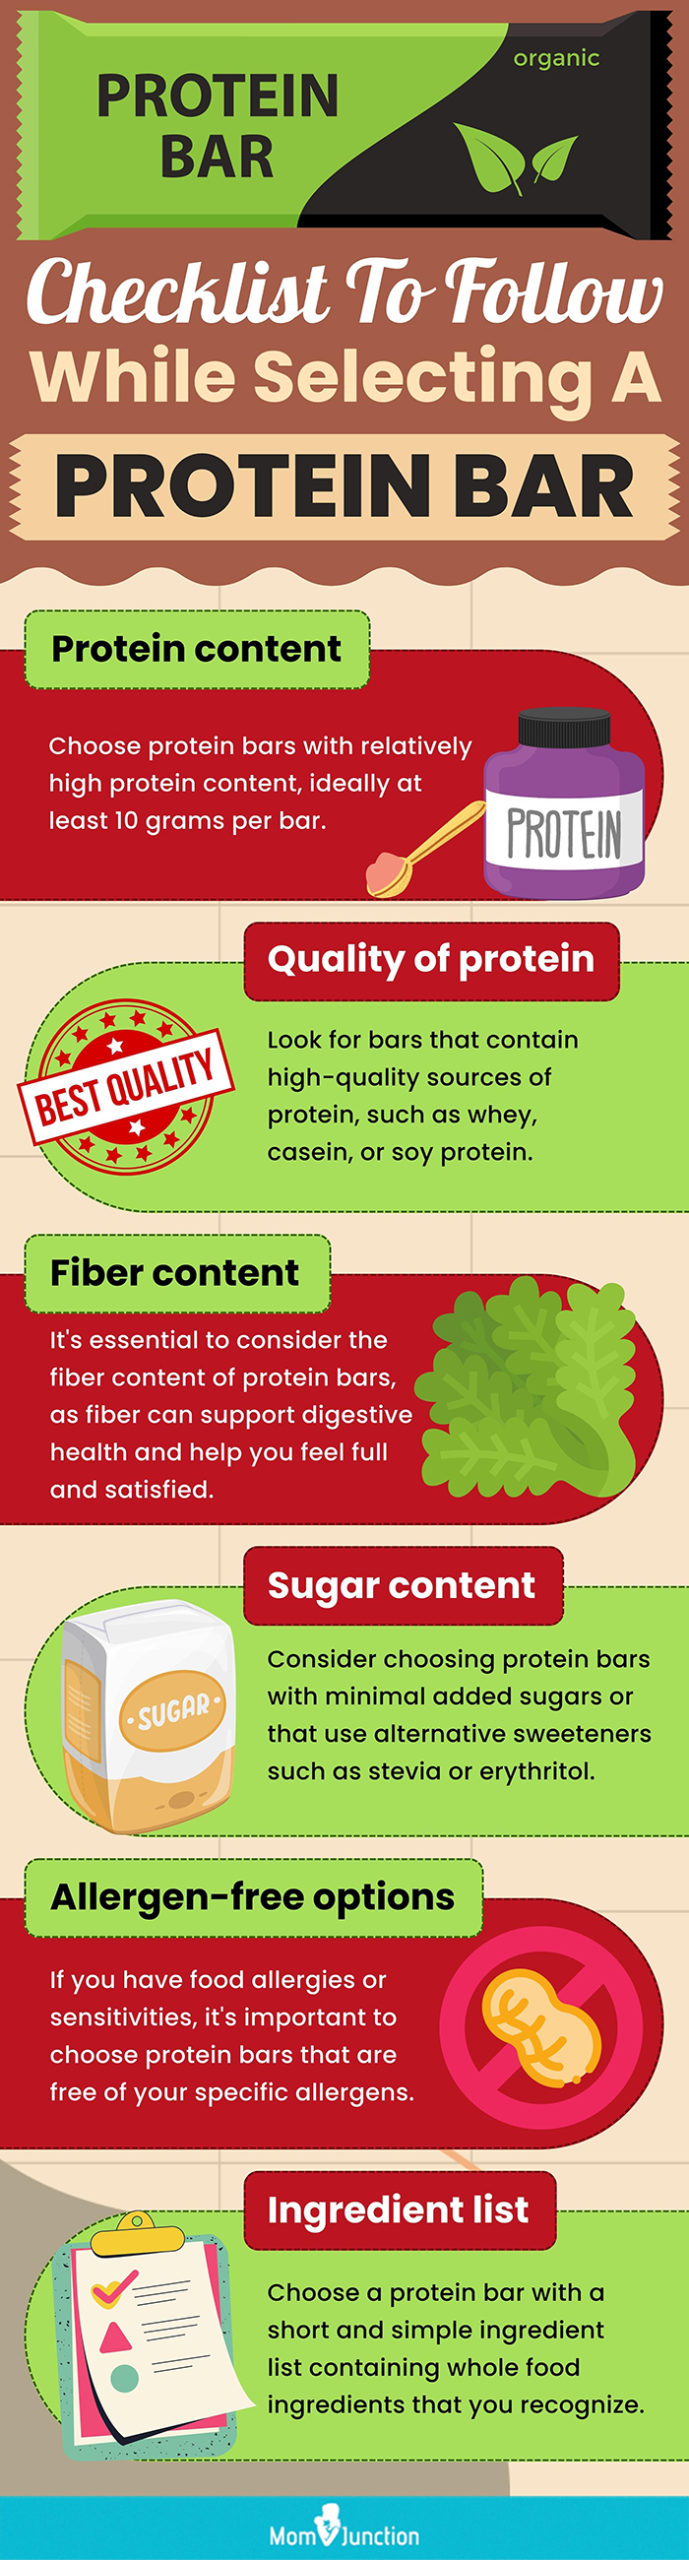 Checklist To Follow While Selecting A Protein Bar (infographic)